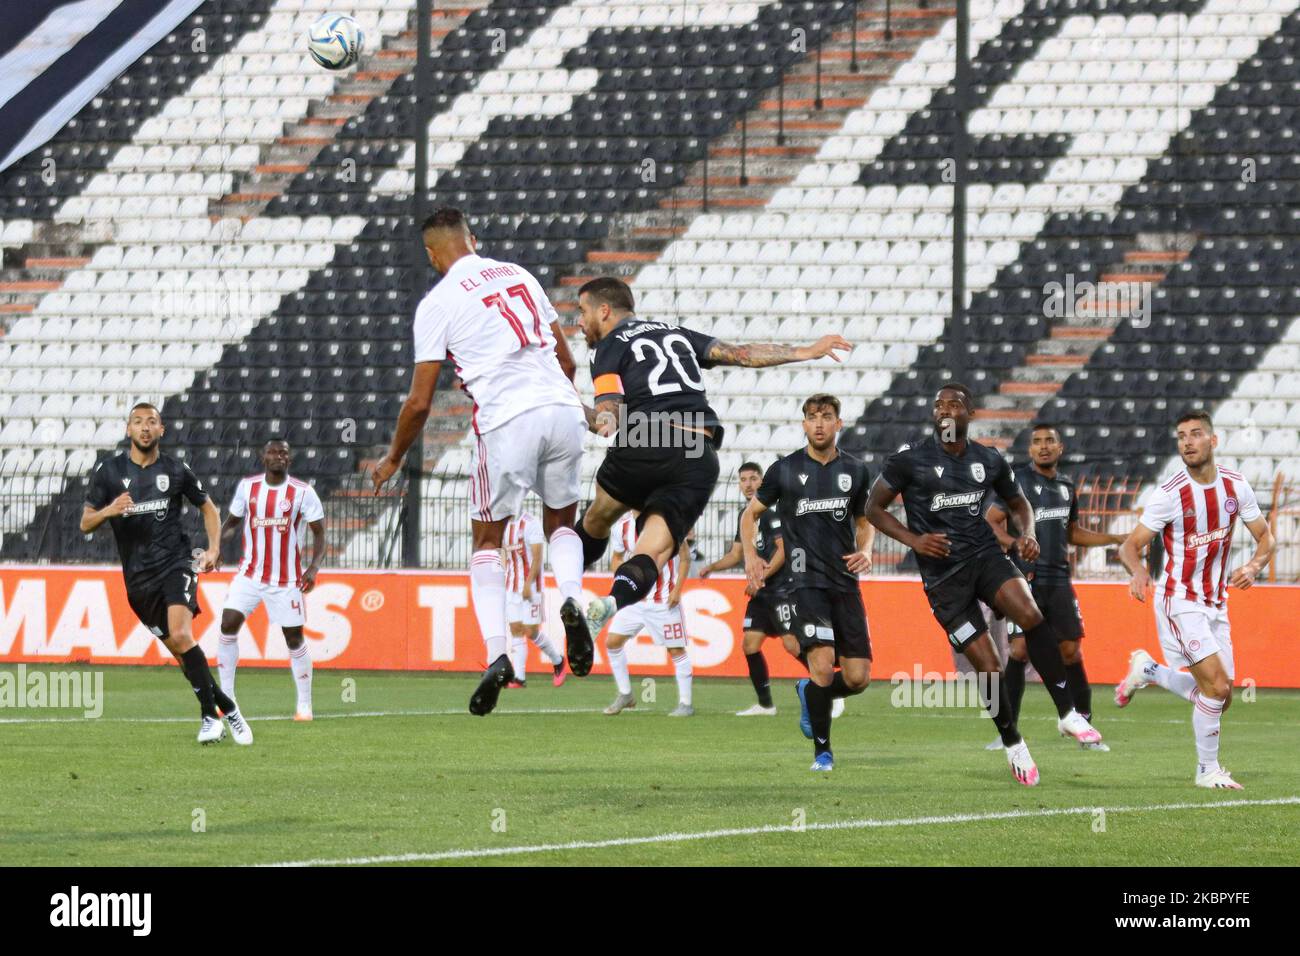 Vieirinha #20 captain of PAOK and Youssef El-Arabi or El Arabi #11 of Olympiacos Piraeus as seen in action during PAOK v Olympiacos 0-1 for the Playoffs game of Super League in Greece after a three month long coronavirus freeze of the Greek championship on June 7, 2020 in Thessaloniki, Greece. Toumba Stadium, home of PAOK was empty, without fans as a protective measure against the spread of COVID-19 coronavirus pandemic and all the people inside have been examined and provided with masks and gloves. (Photo by Nicolas Economou/NurPhoto) Stock Photo